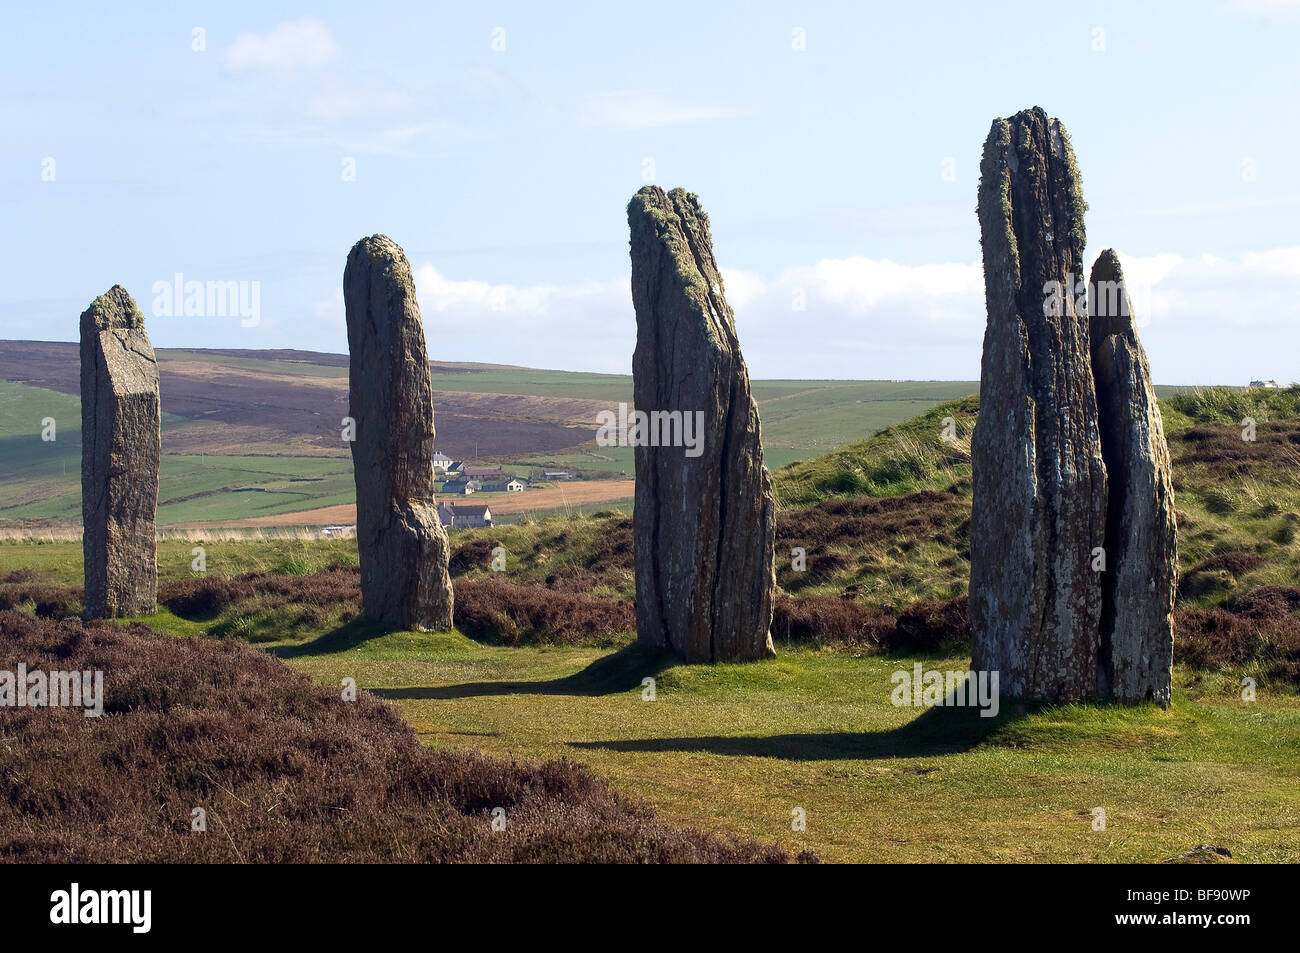 The Standing Stones o' Stenness. Henge. Stone circle. Tall upright megaliths. Stenness. Scotland. Stock Photo